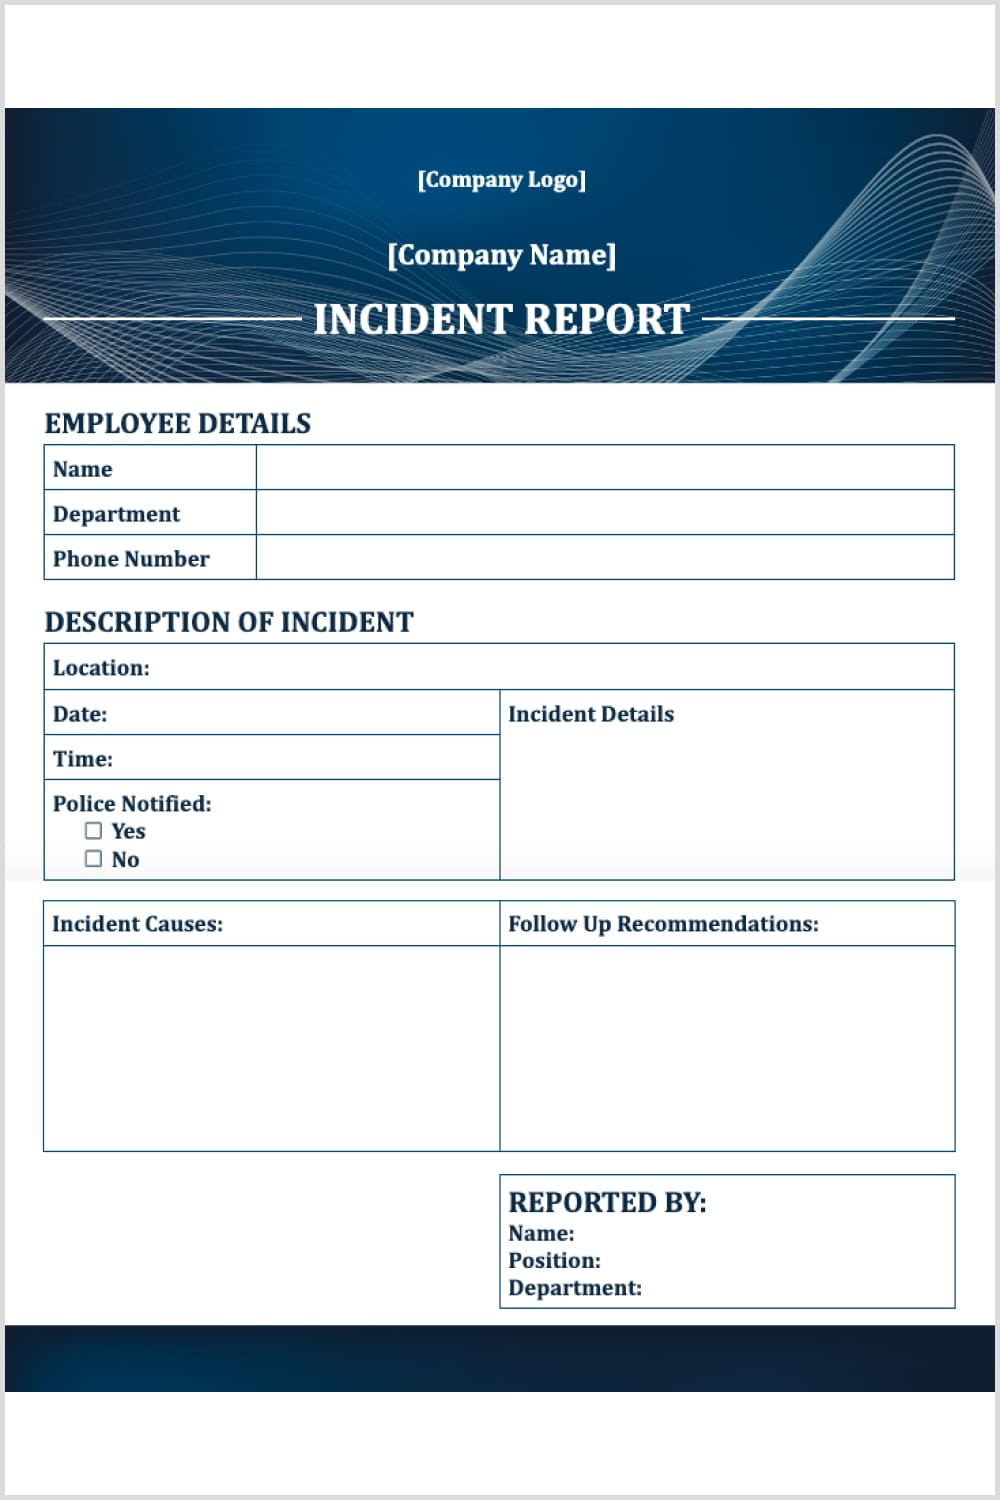 Incident report in multiple tables.